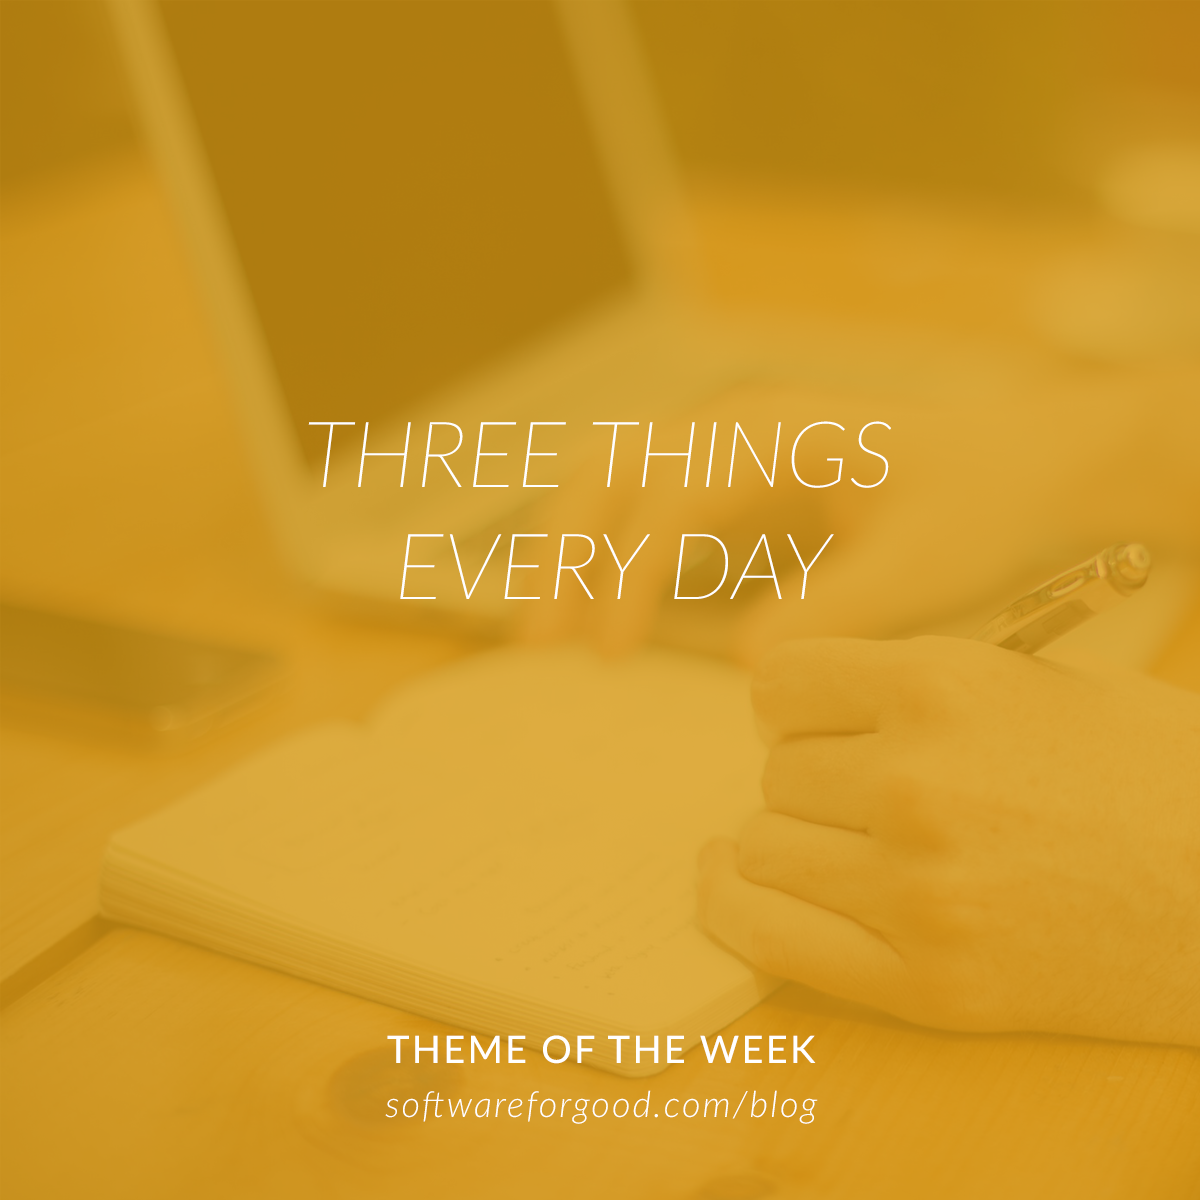 Three Things Every Day